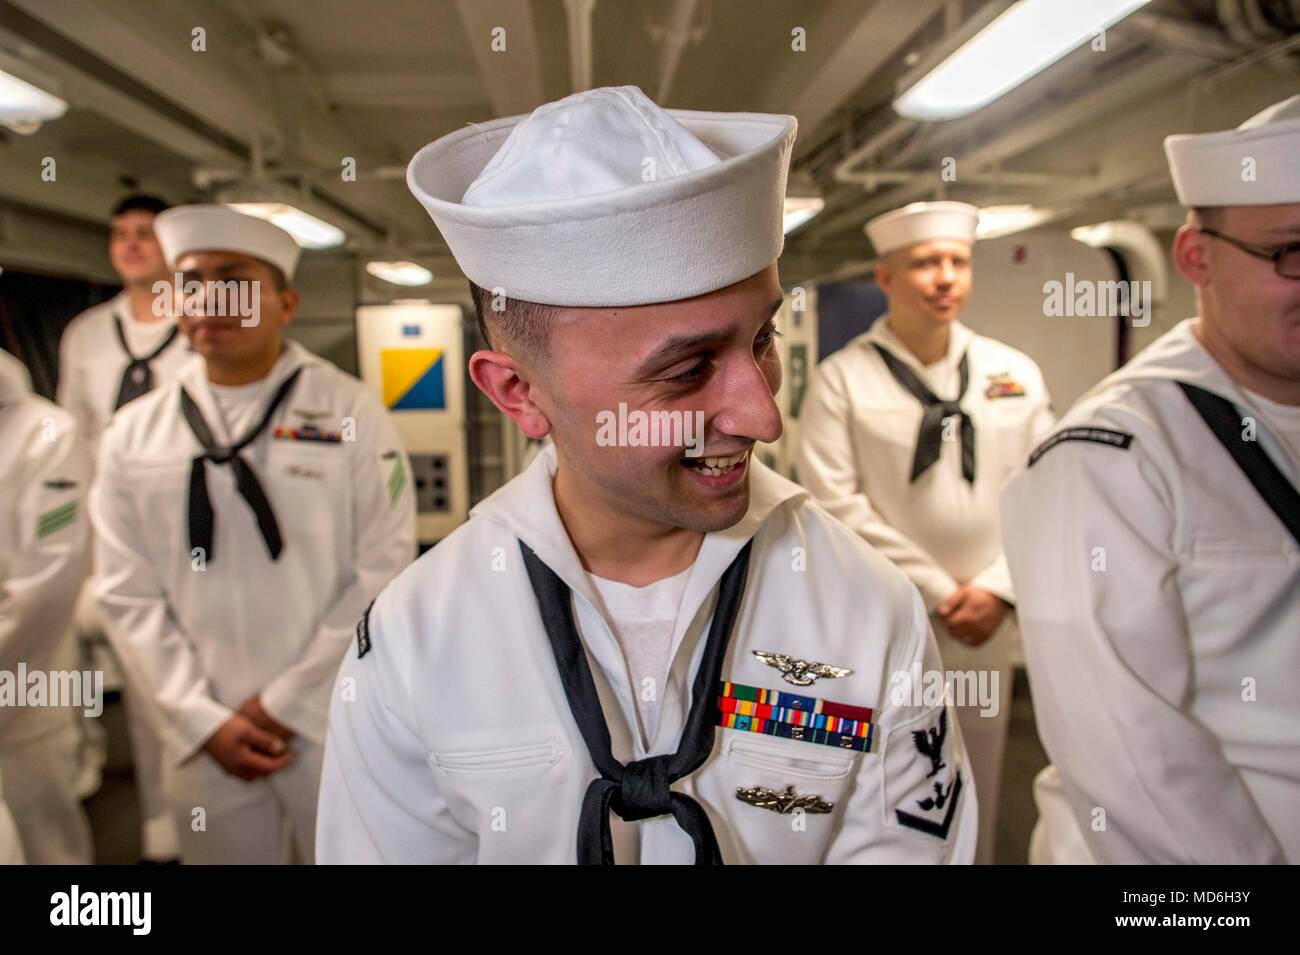 180320-N-NG136-0088 NORFOLK, Va. (March 20, 2018) Aviation Ordnanceman 3rd Class Julio Pino laughs after a service dress white uniform inspection aboard the aircraft carrier USS George H.W. Bush (CVN 77). The ship is in port in Norfolk, Virginia, conducting sustainment exercises to maintain carrier readiness. (U.S. Navy photo by Mass Communication Specialist 3rd Class Zachary P. Wickline) Stock Photo